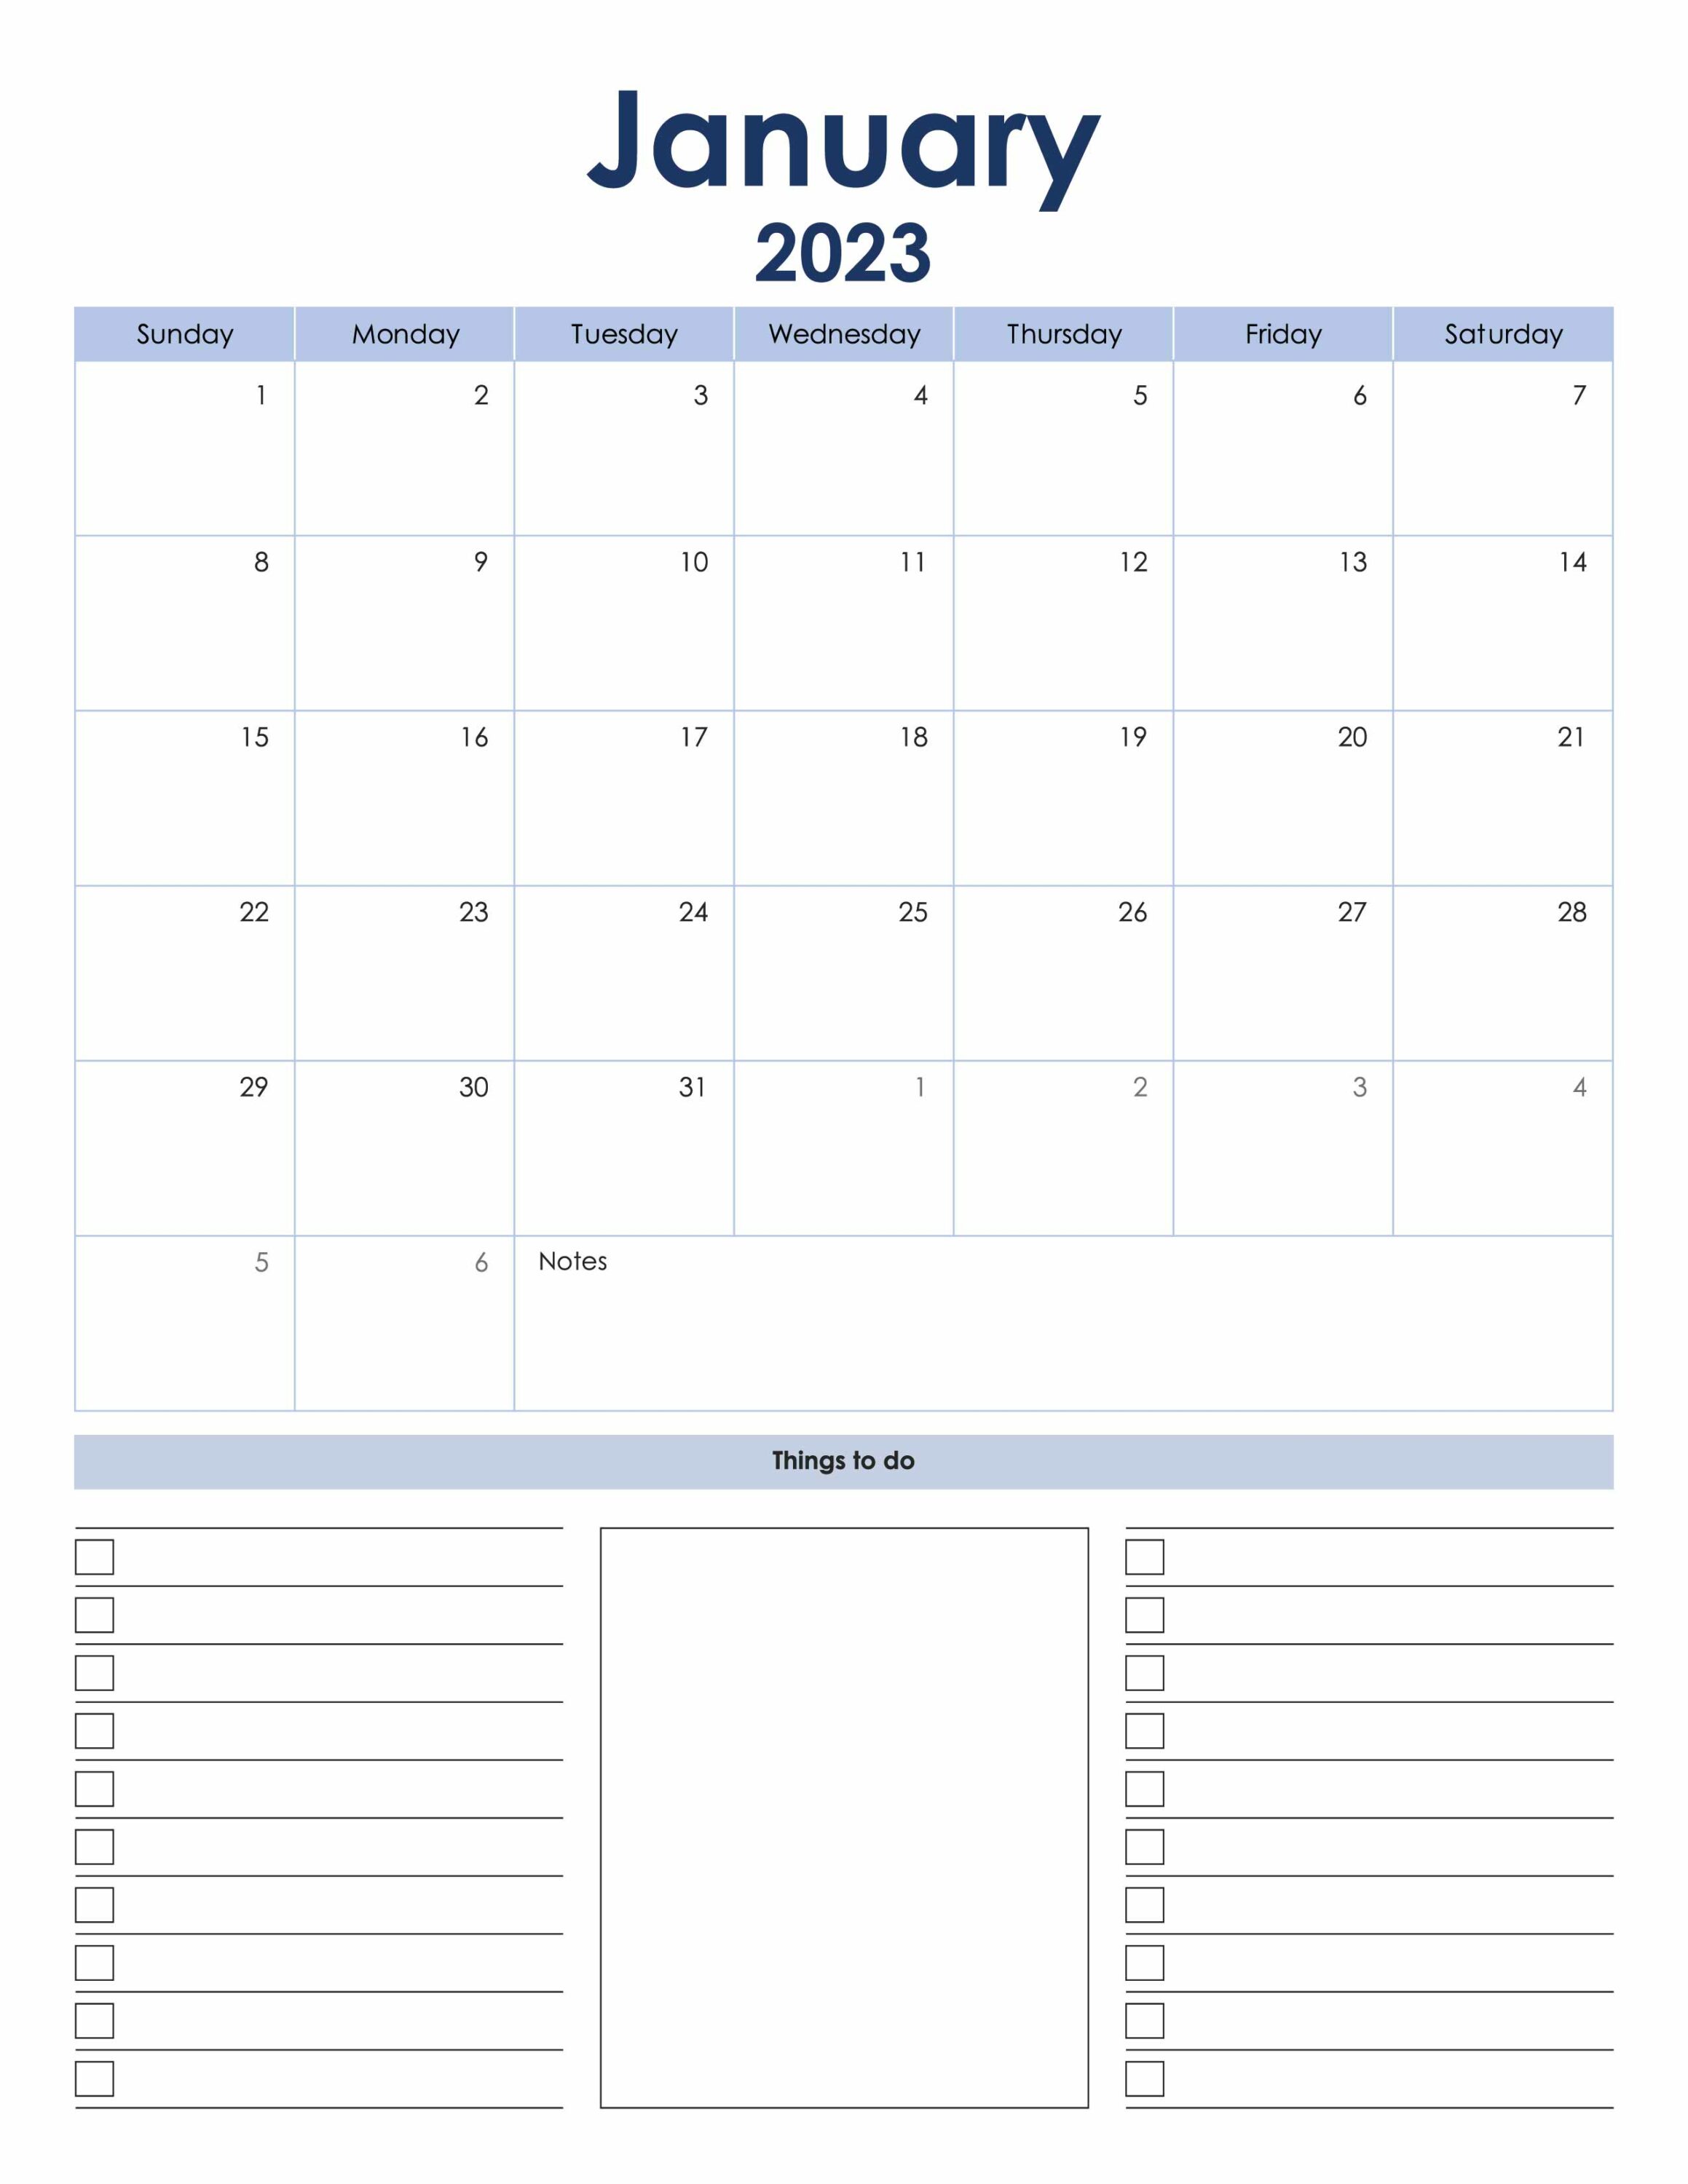 2023 Dated Planner Bundle, January page.